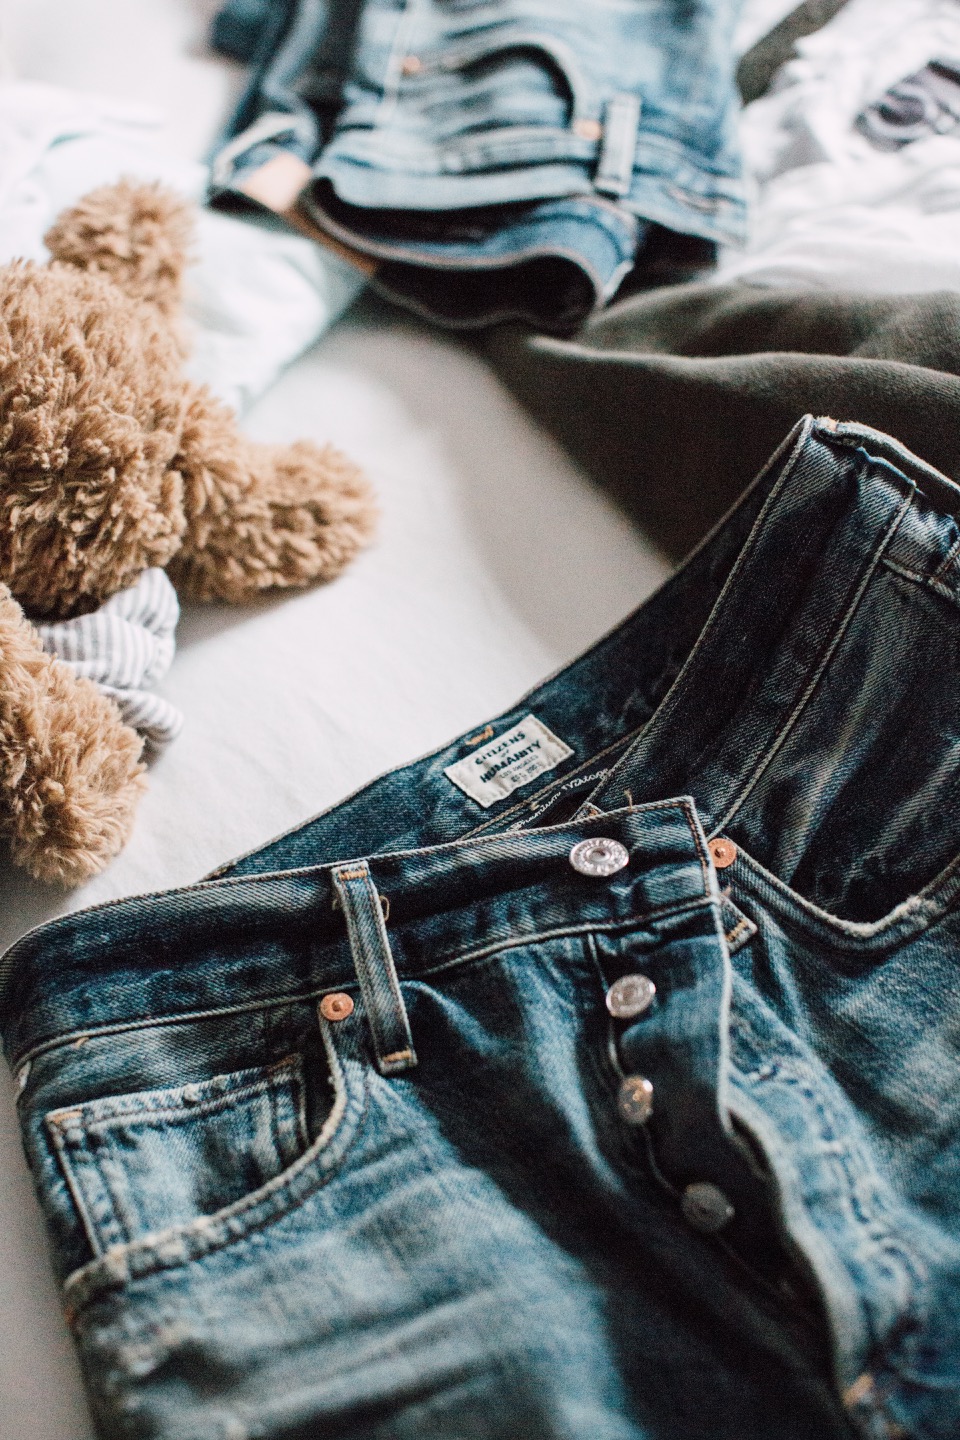 best tips for denim care and washing